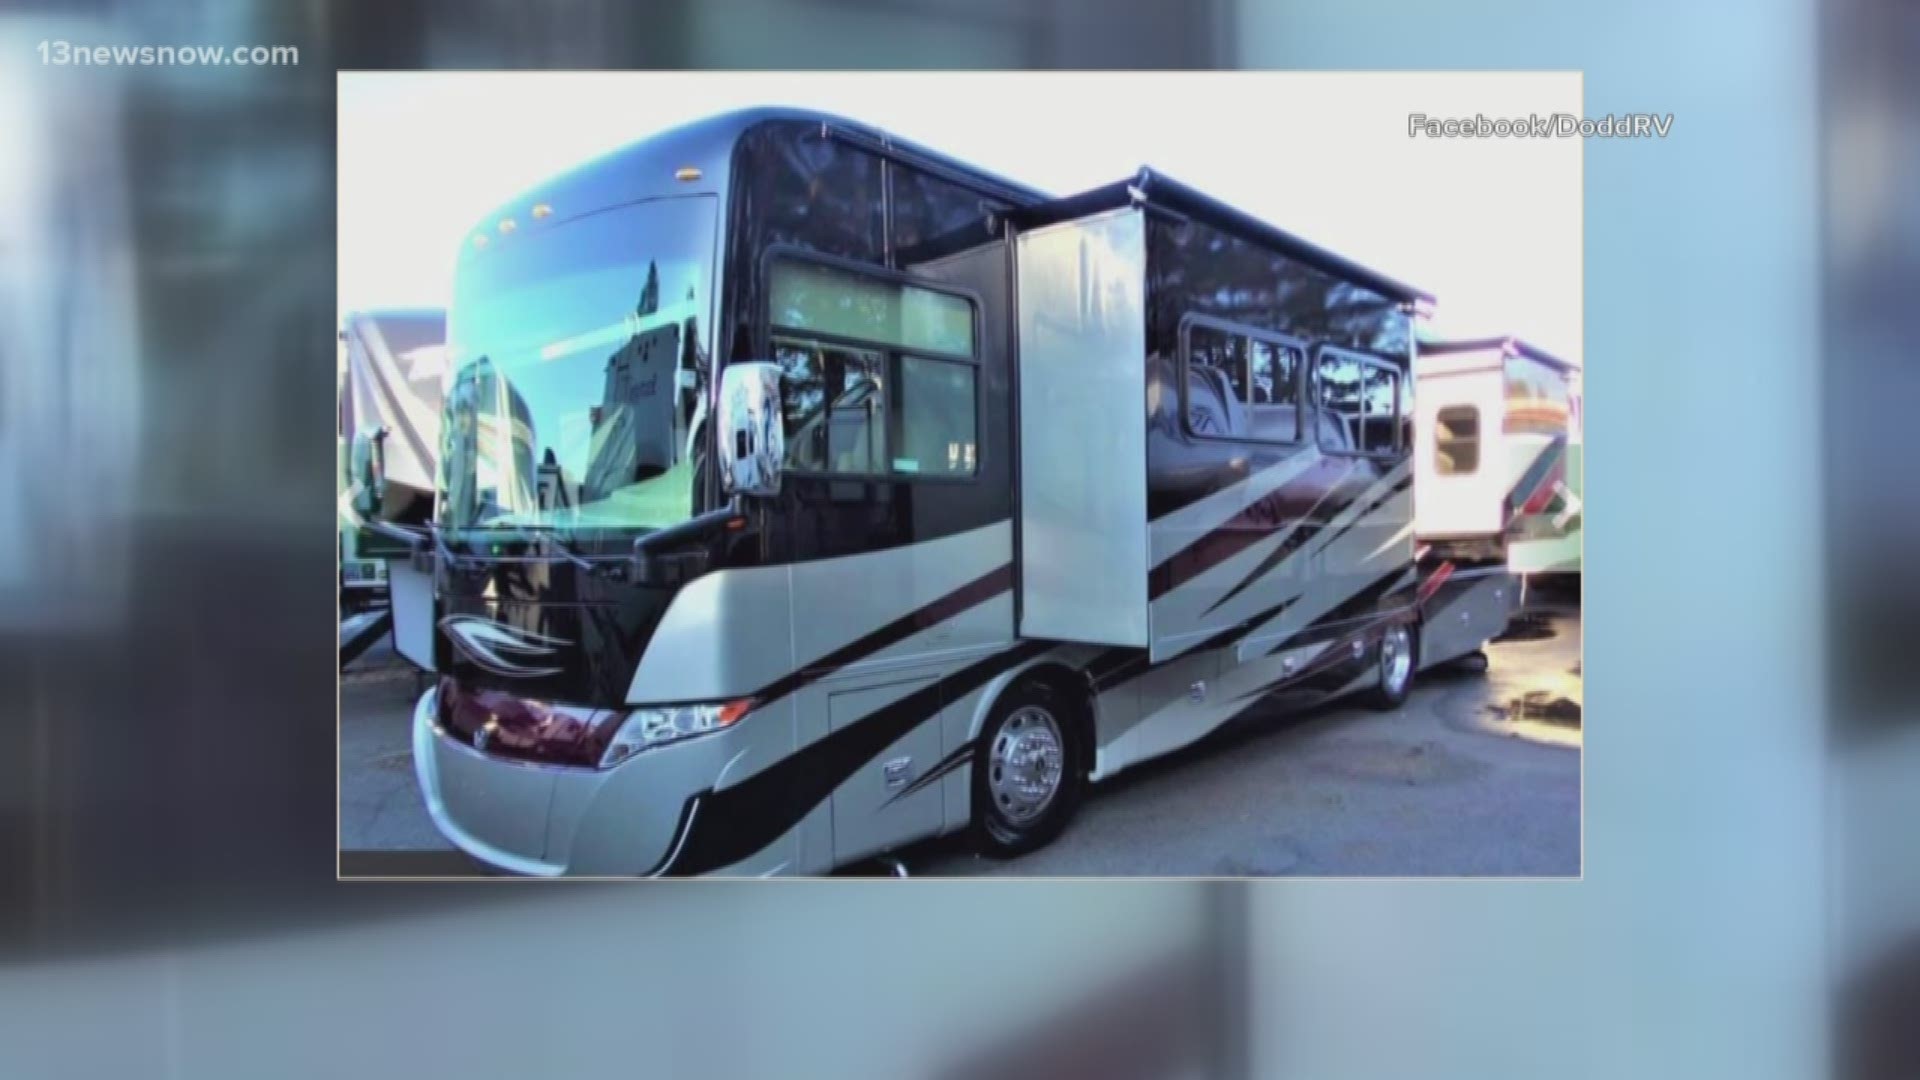 An RV was stolen from the Hampton Convention Center parking lot!